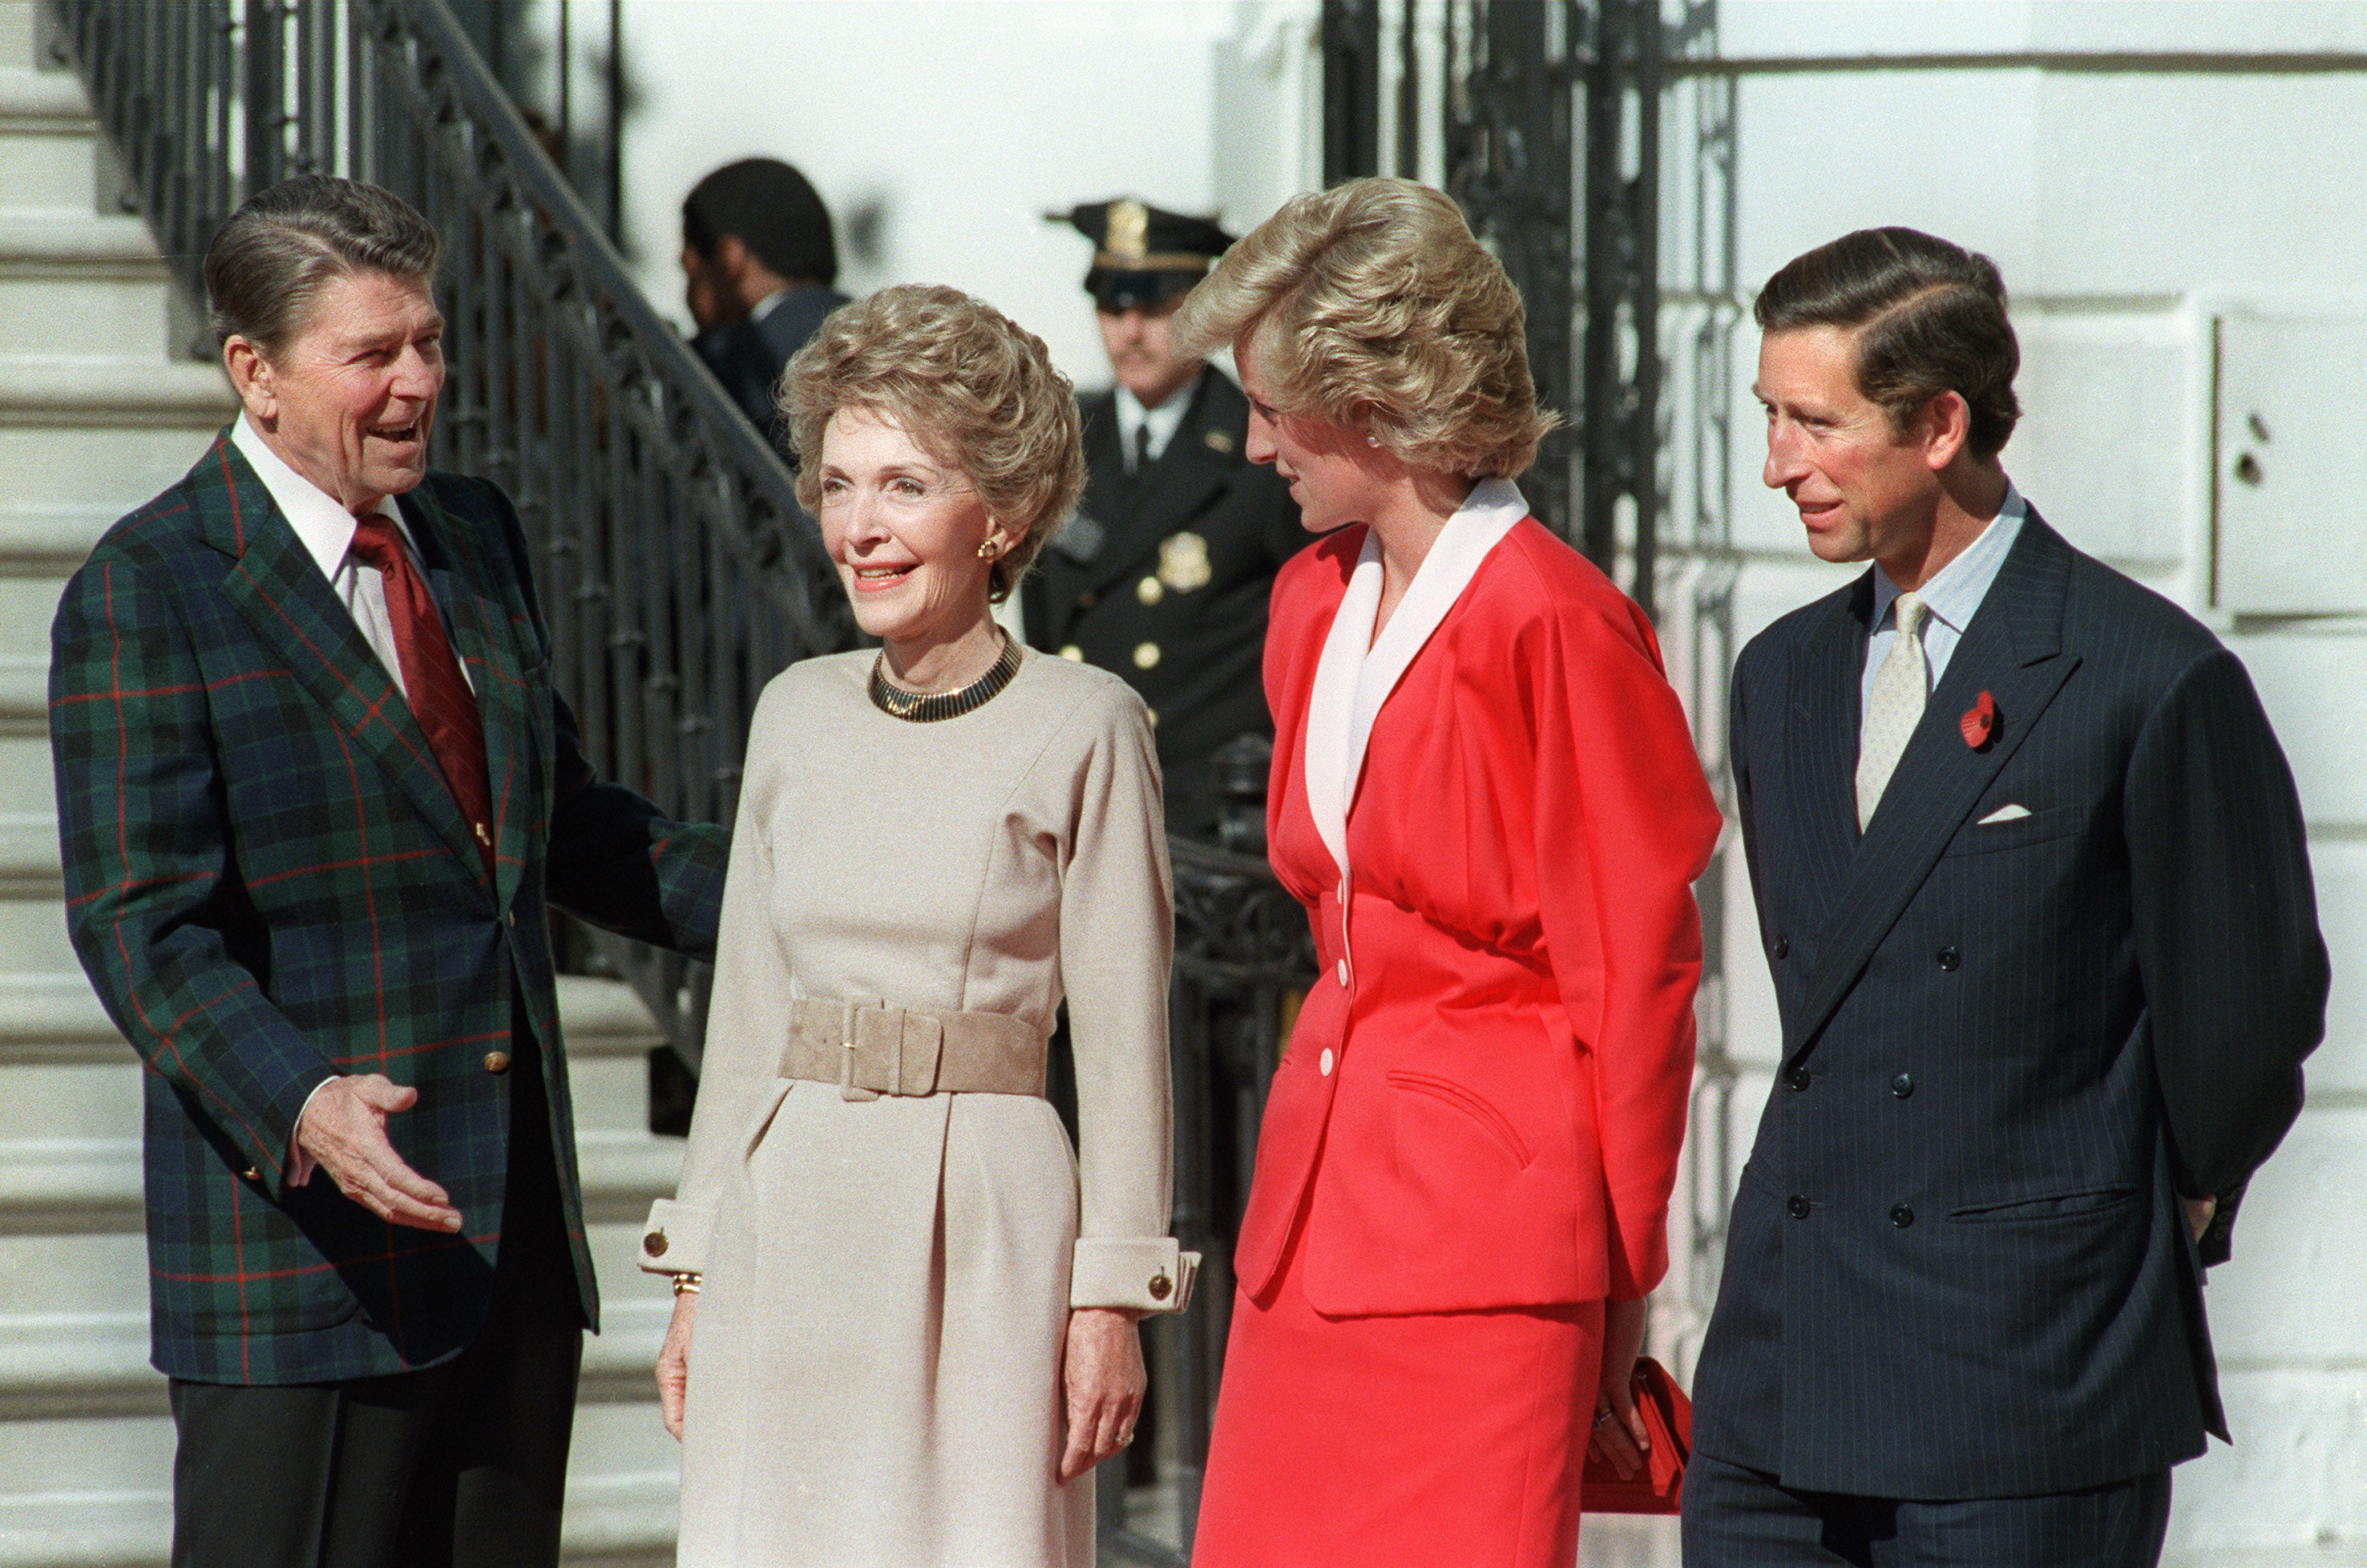 US President Ronald Reagan and wife Nancy welcome Princess Diana and Prince Charles at the White House in 1985